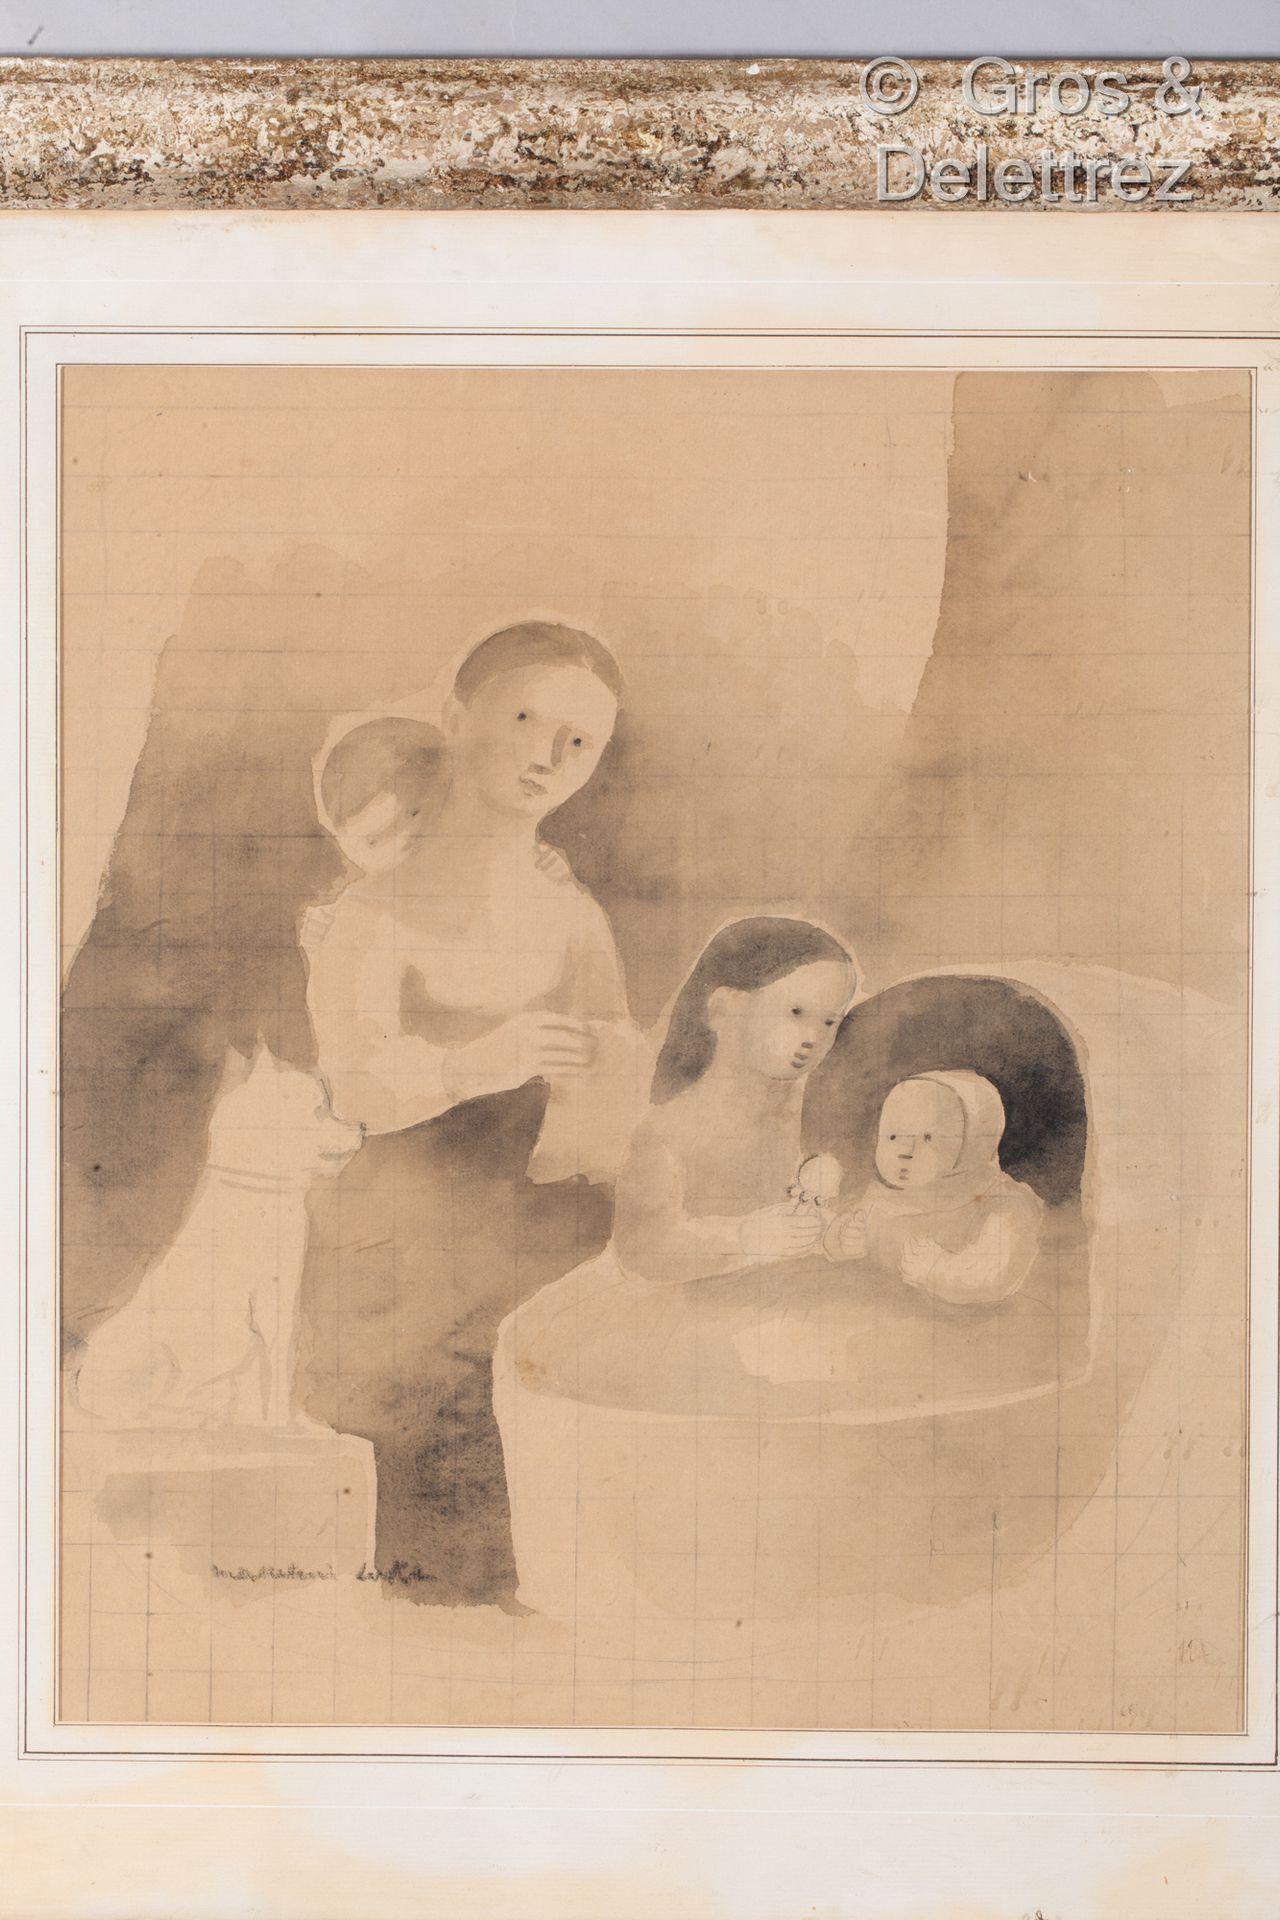 Null (E) Madeleine LUKA (1894-1989)

Family and newborn child

Pencil and ink wa&hellip;